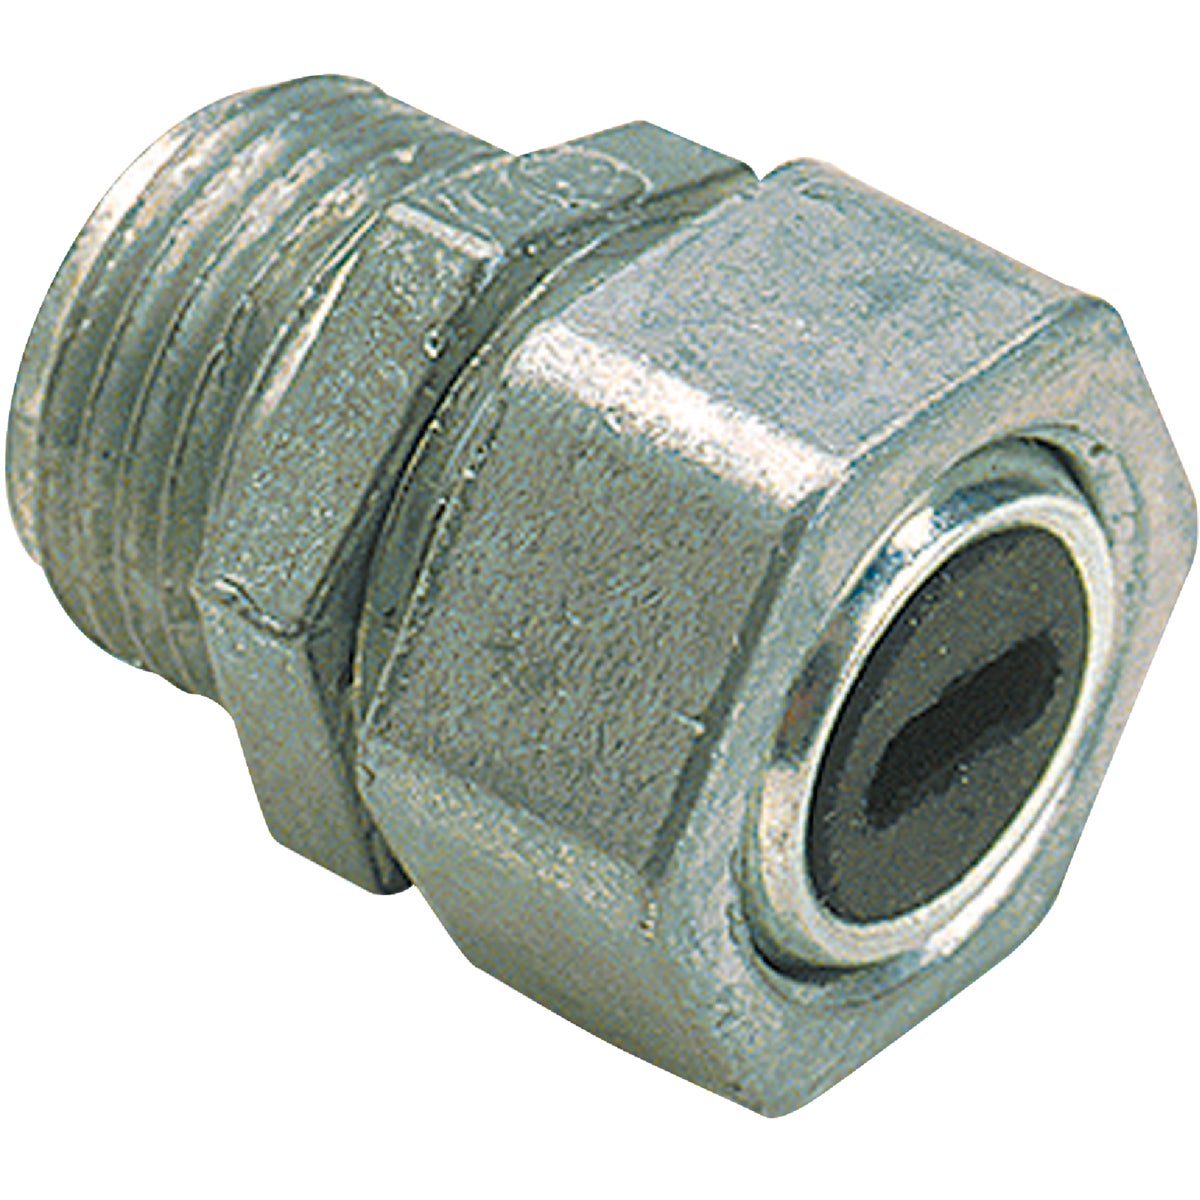 Item 502324, Watertight connector ideal for use indoors or outdoors.